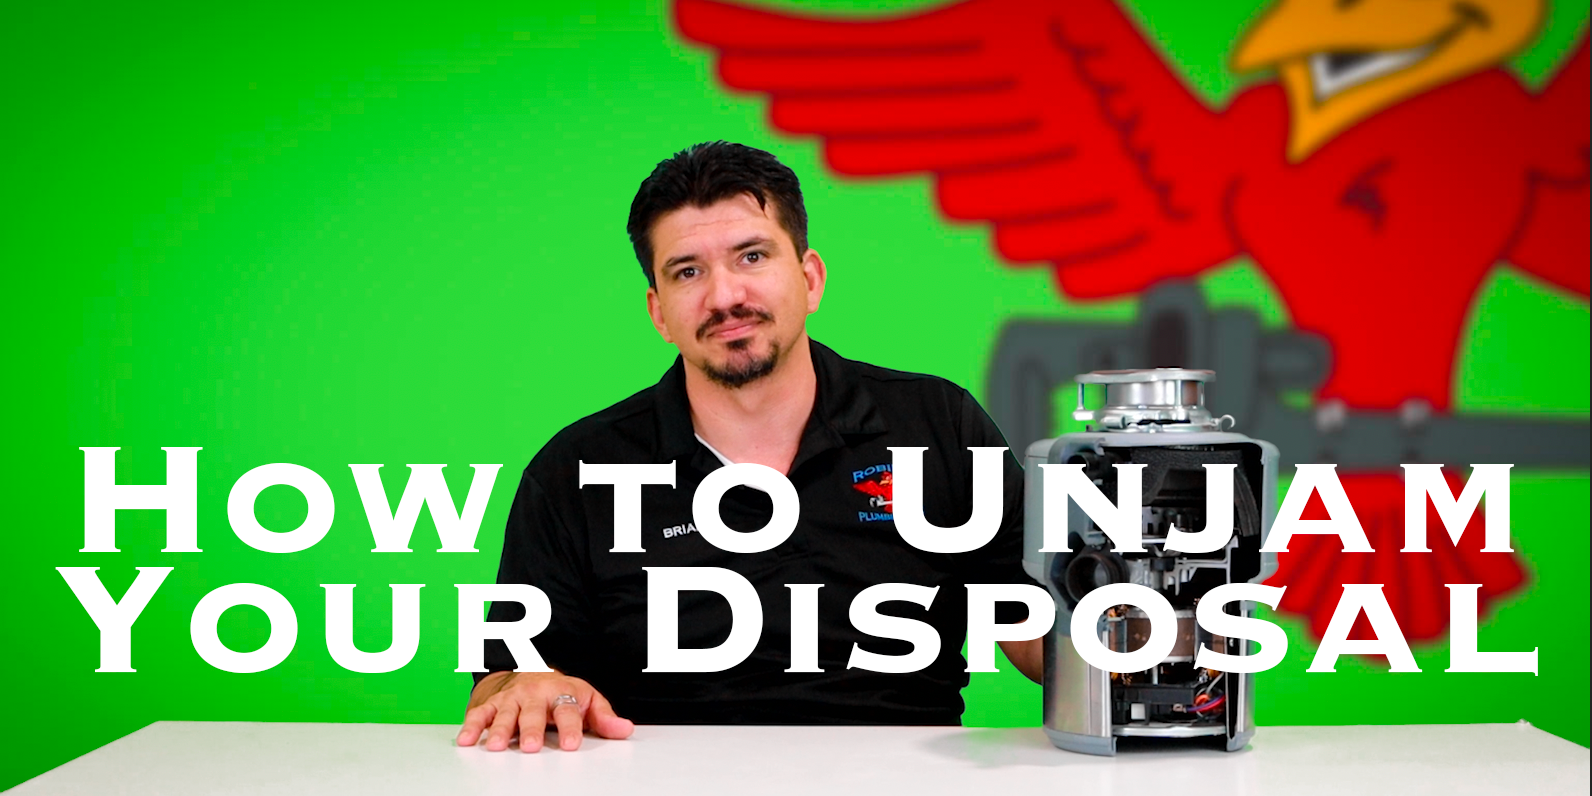 Cover photo for blog and video "How to Unjam Your Garbage Disposal"